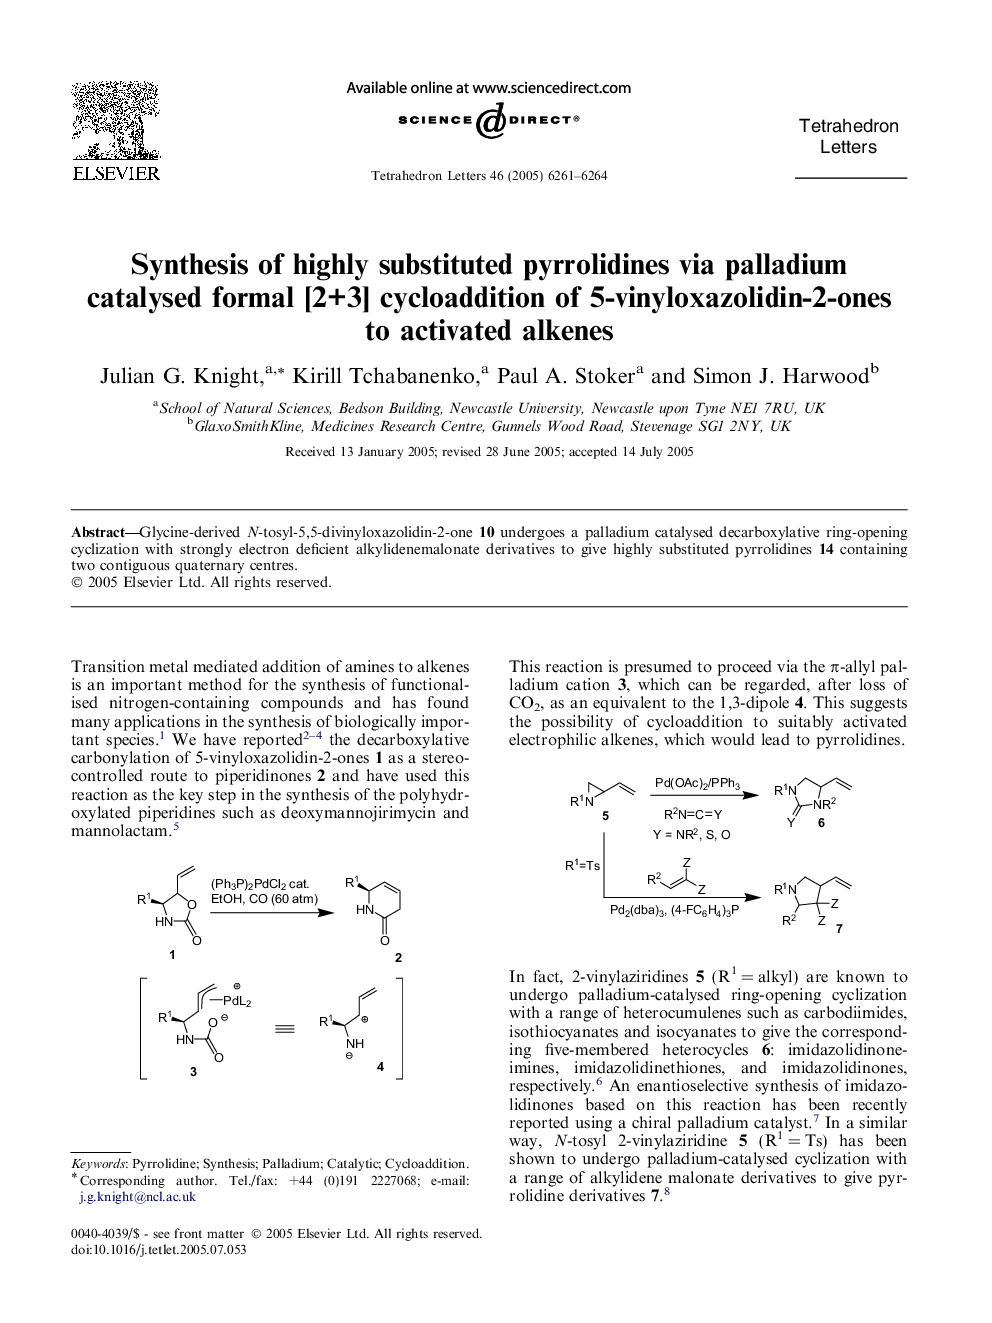 Synthesis of highly substituted pyrrolidines via palladium catalysed formal [2+3] cycloaddition of 5-vinyloxazolidin-2-ones to activated alkenes